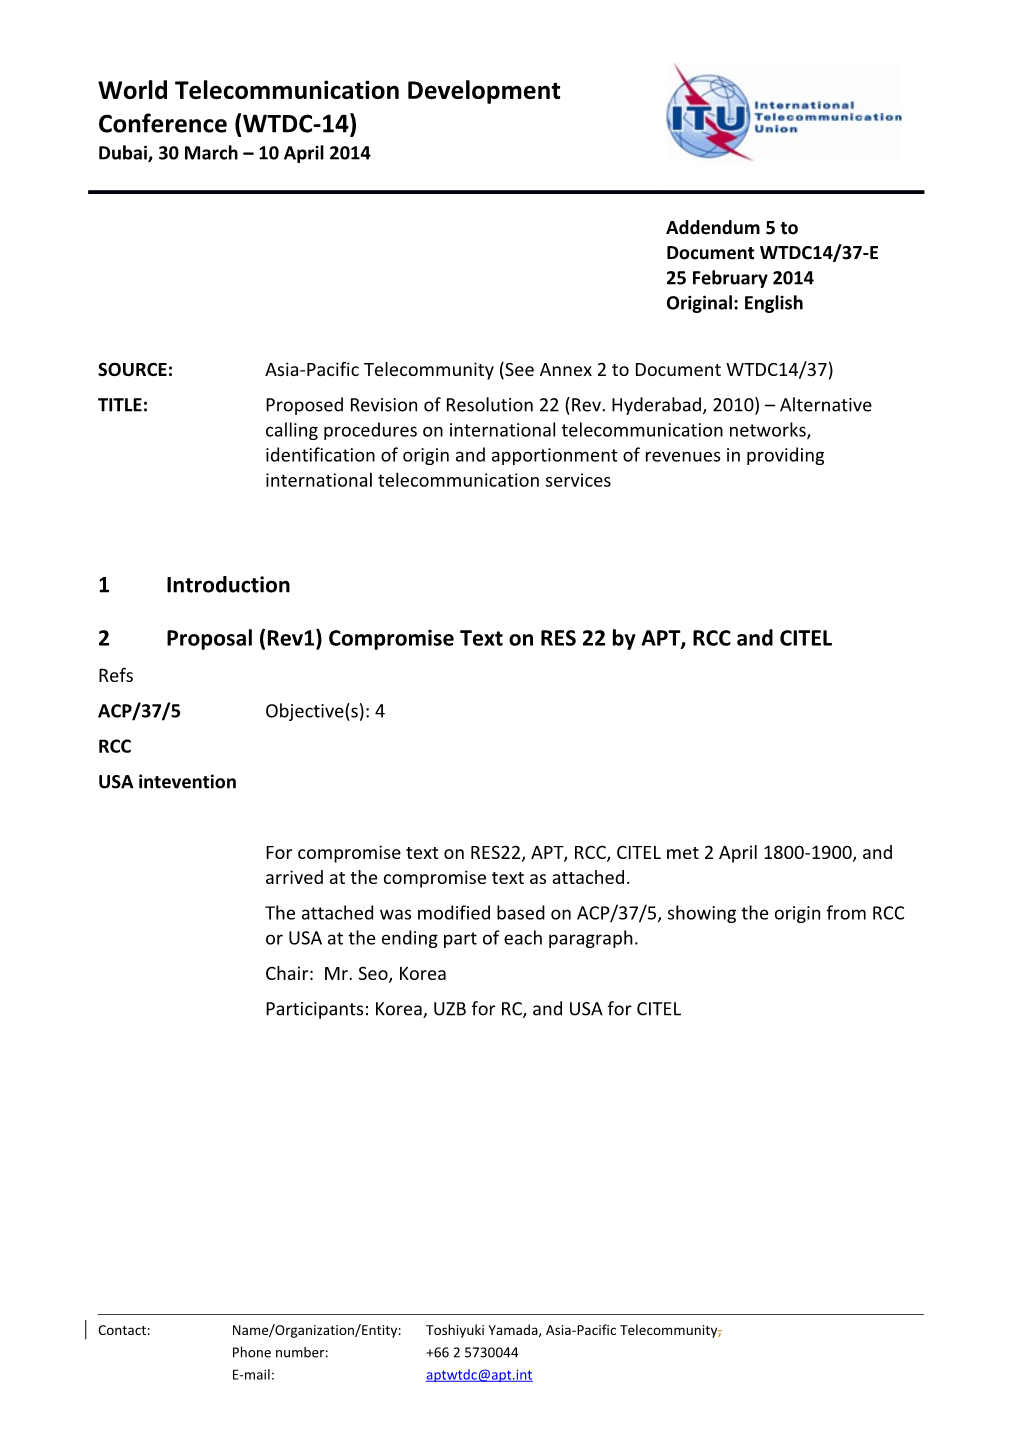 2Proposal (Rev1) Compromise Texton RES 22 by APT, RCC and CITEL